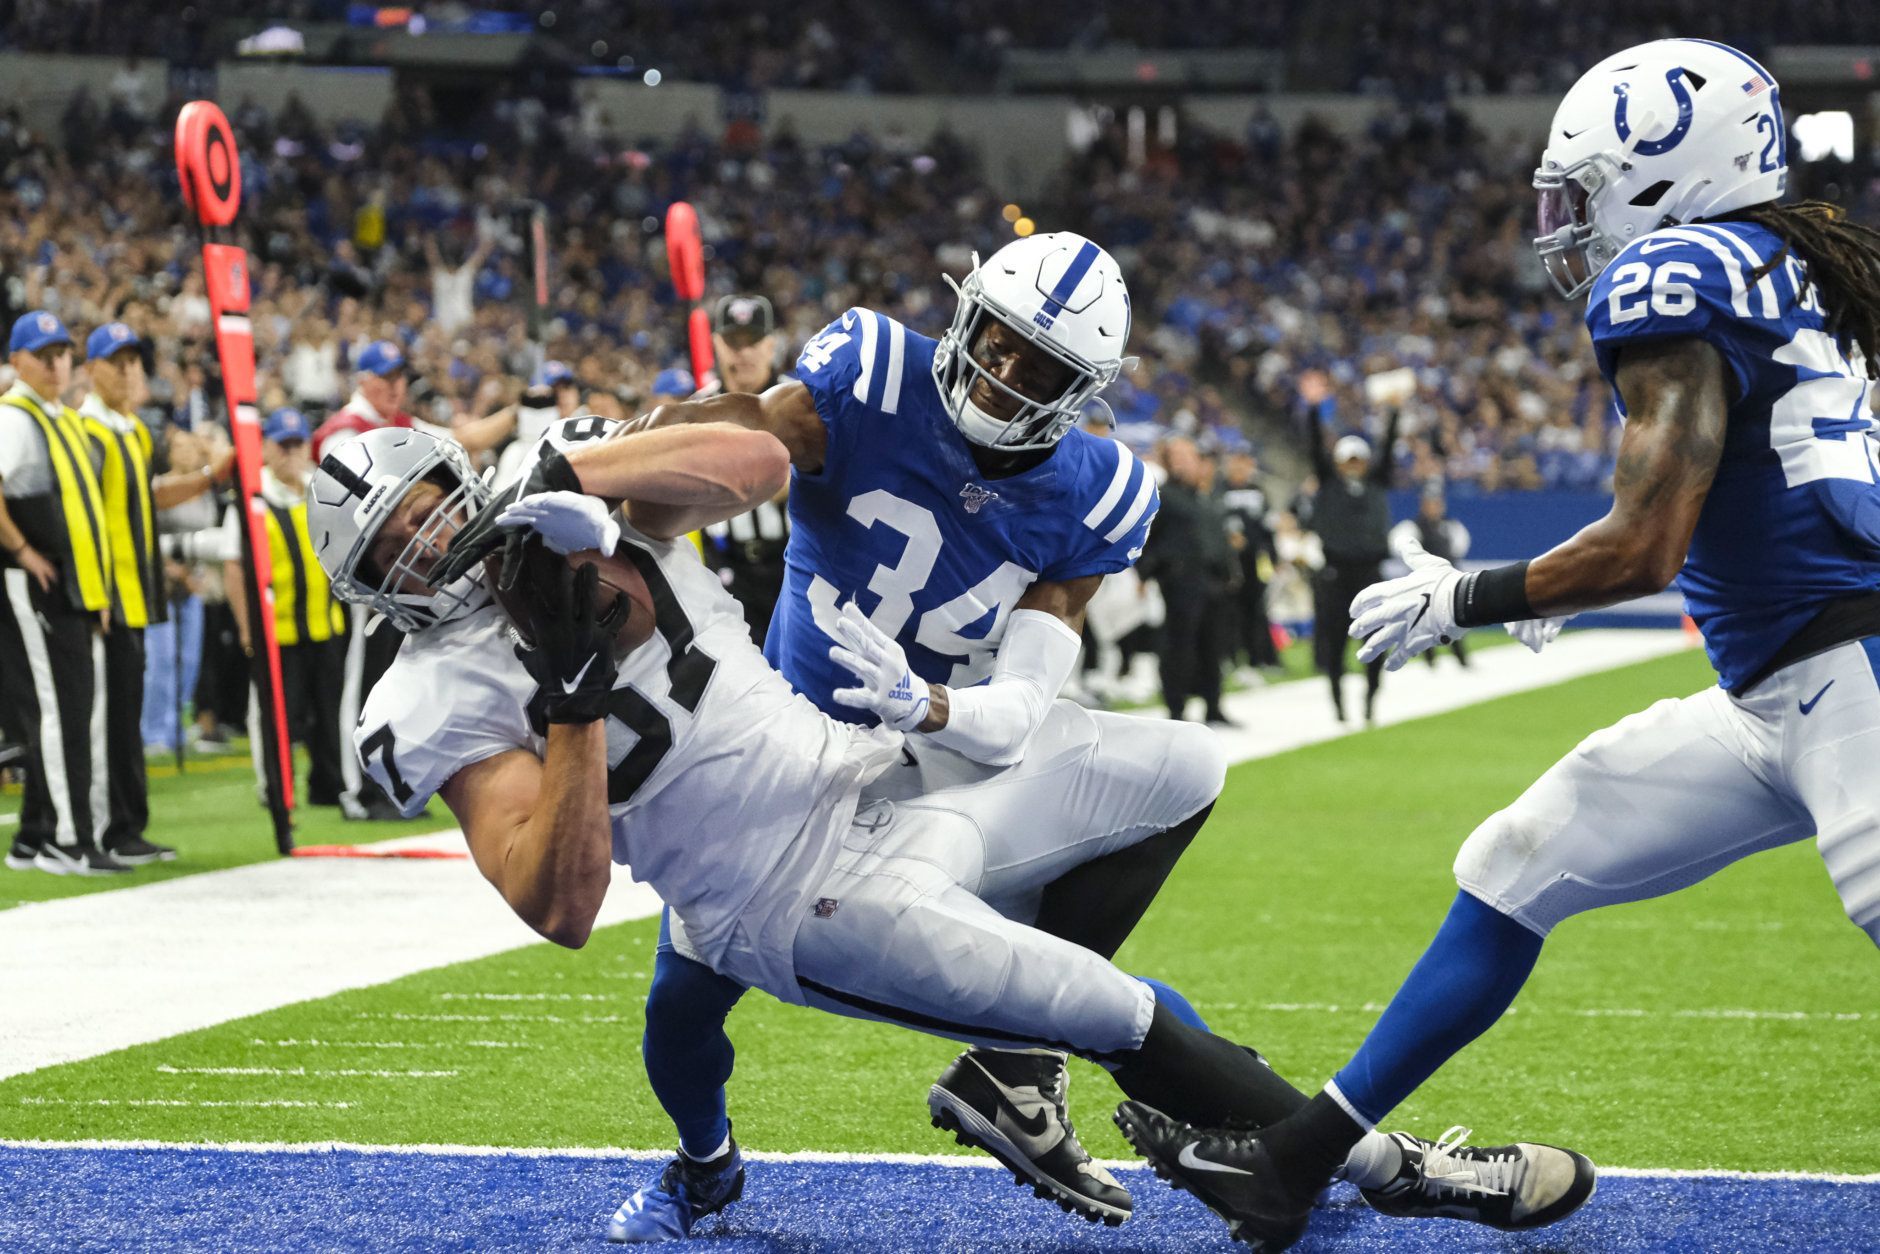 <p><em><strong>Raiders 31</strong></em><br />
<em><strong>Colts 24</strong></em></p>
<p>I know it&#8217;s still early in the year … but I think this will go down as Indy&#8217;s worst loss of the season and Oakland&#8217;s best win.</p>
